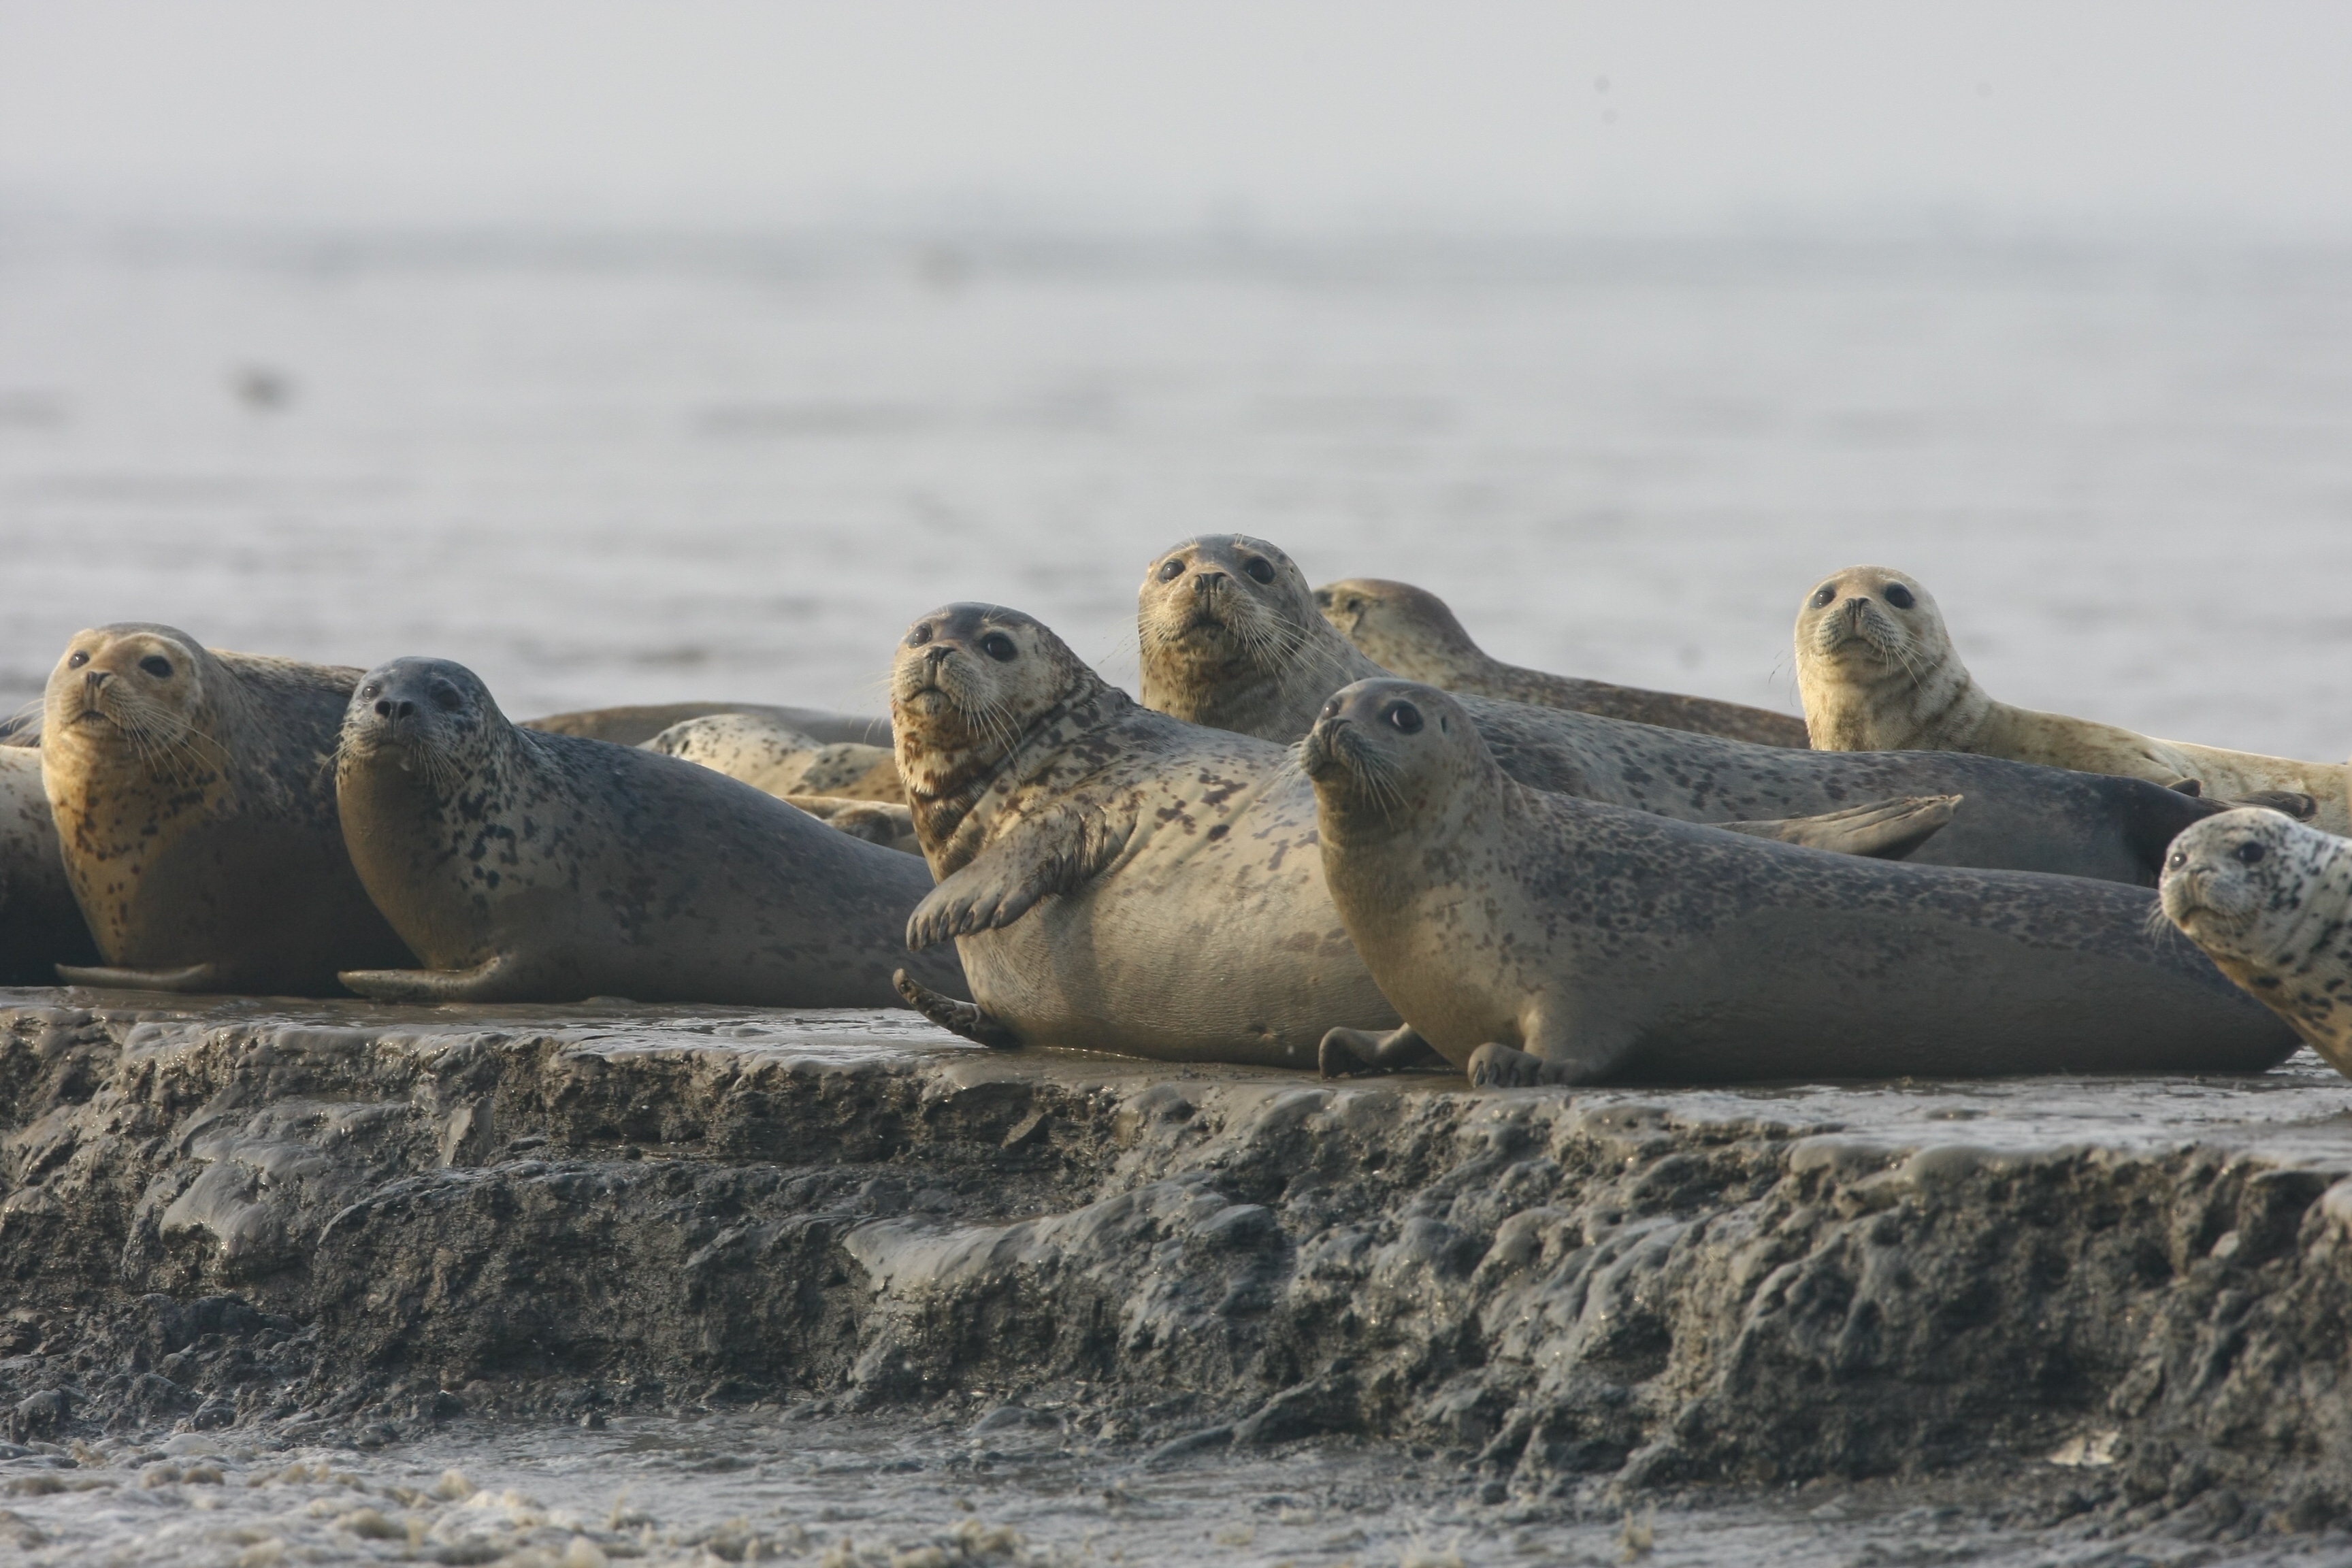 Protected spotted seals thrive in Dalian